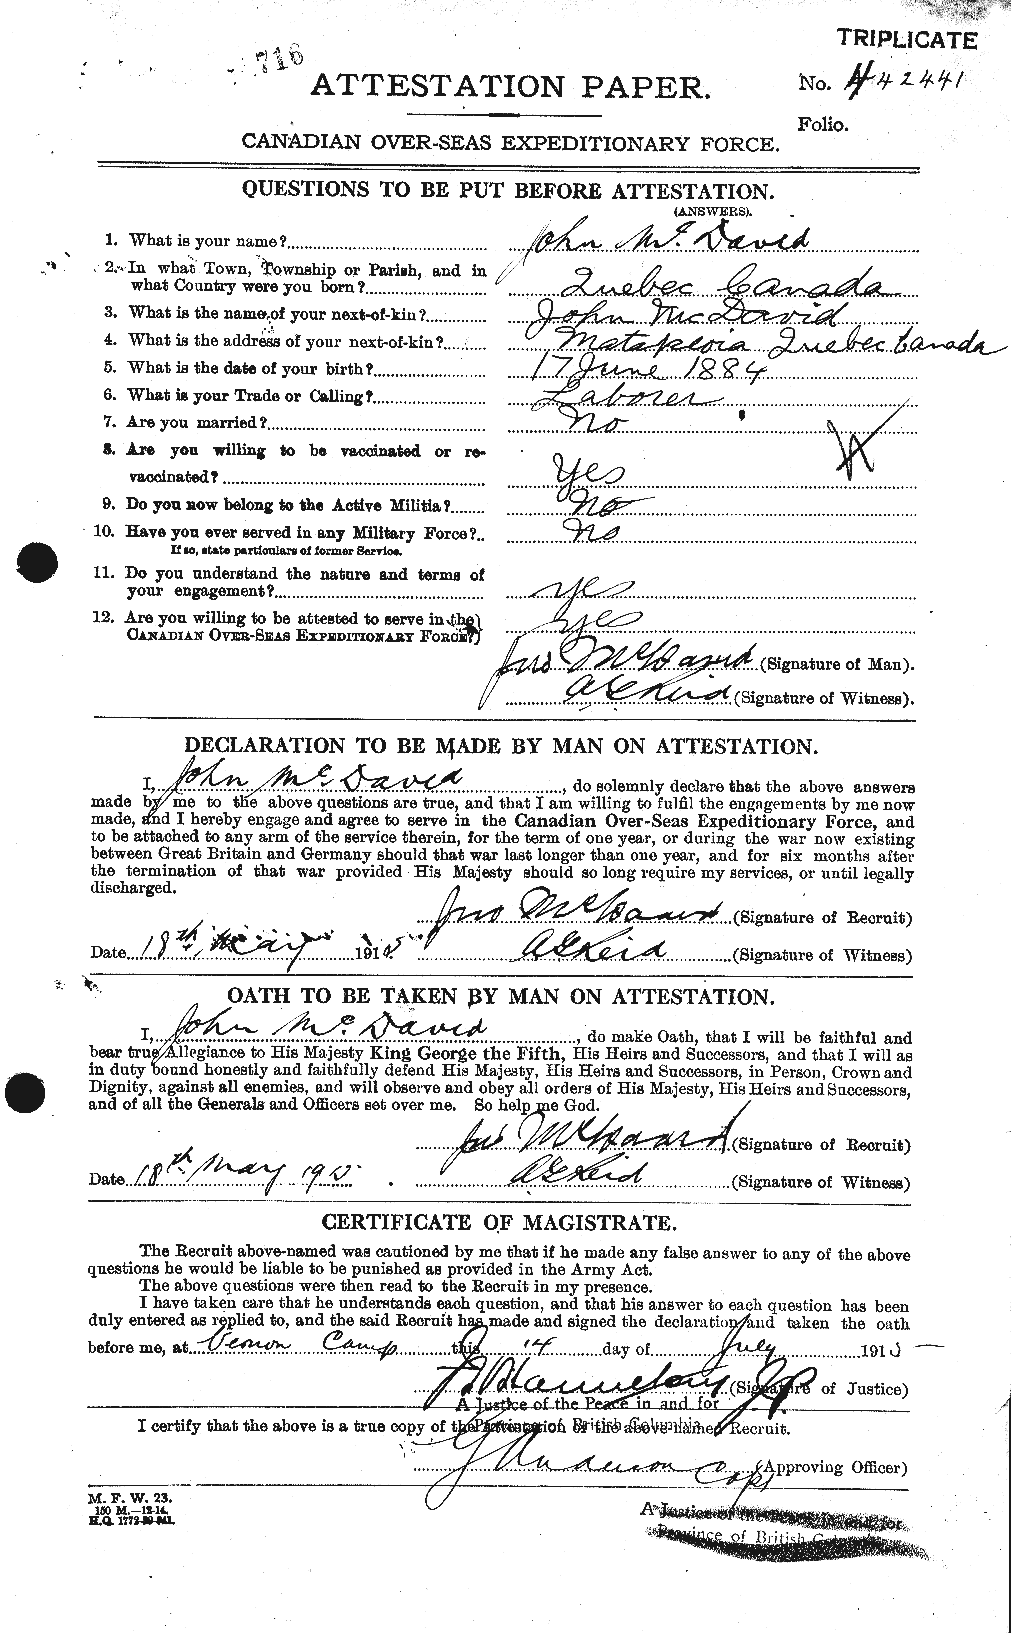 Personnel Records of the First World War - CEF 136196a